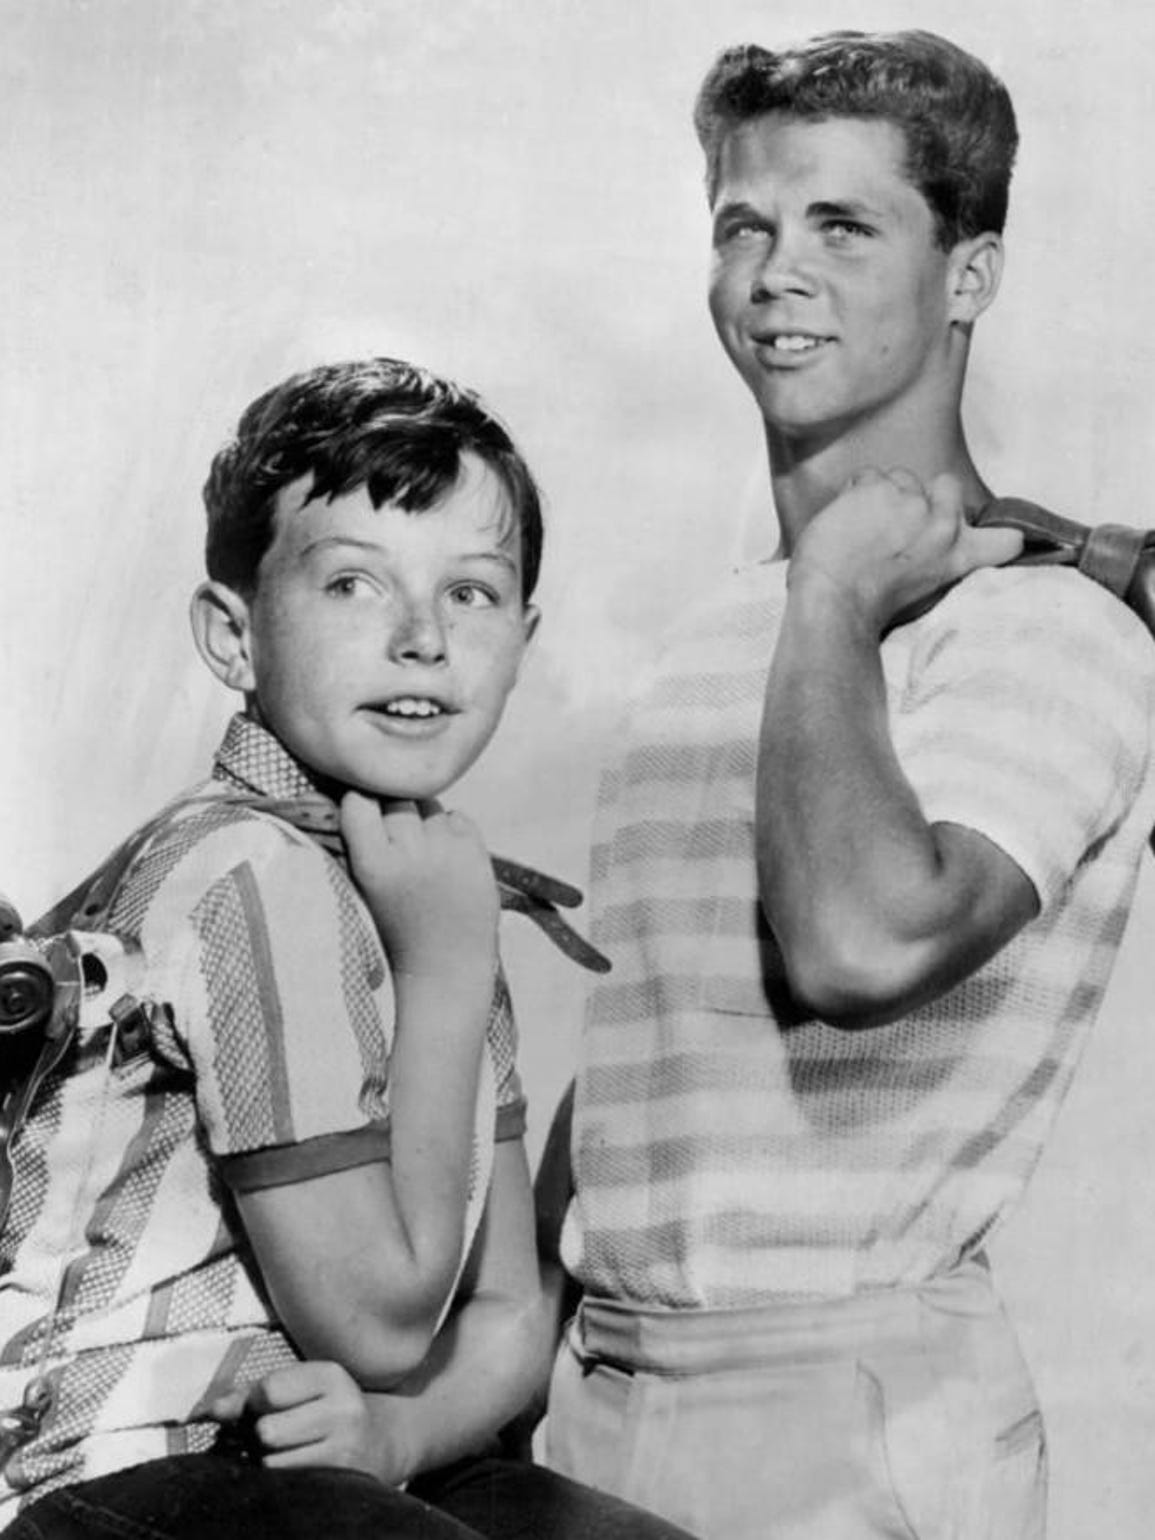 This photo is from Sept. 7, 1961, with Jerry Mathers,